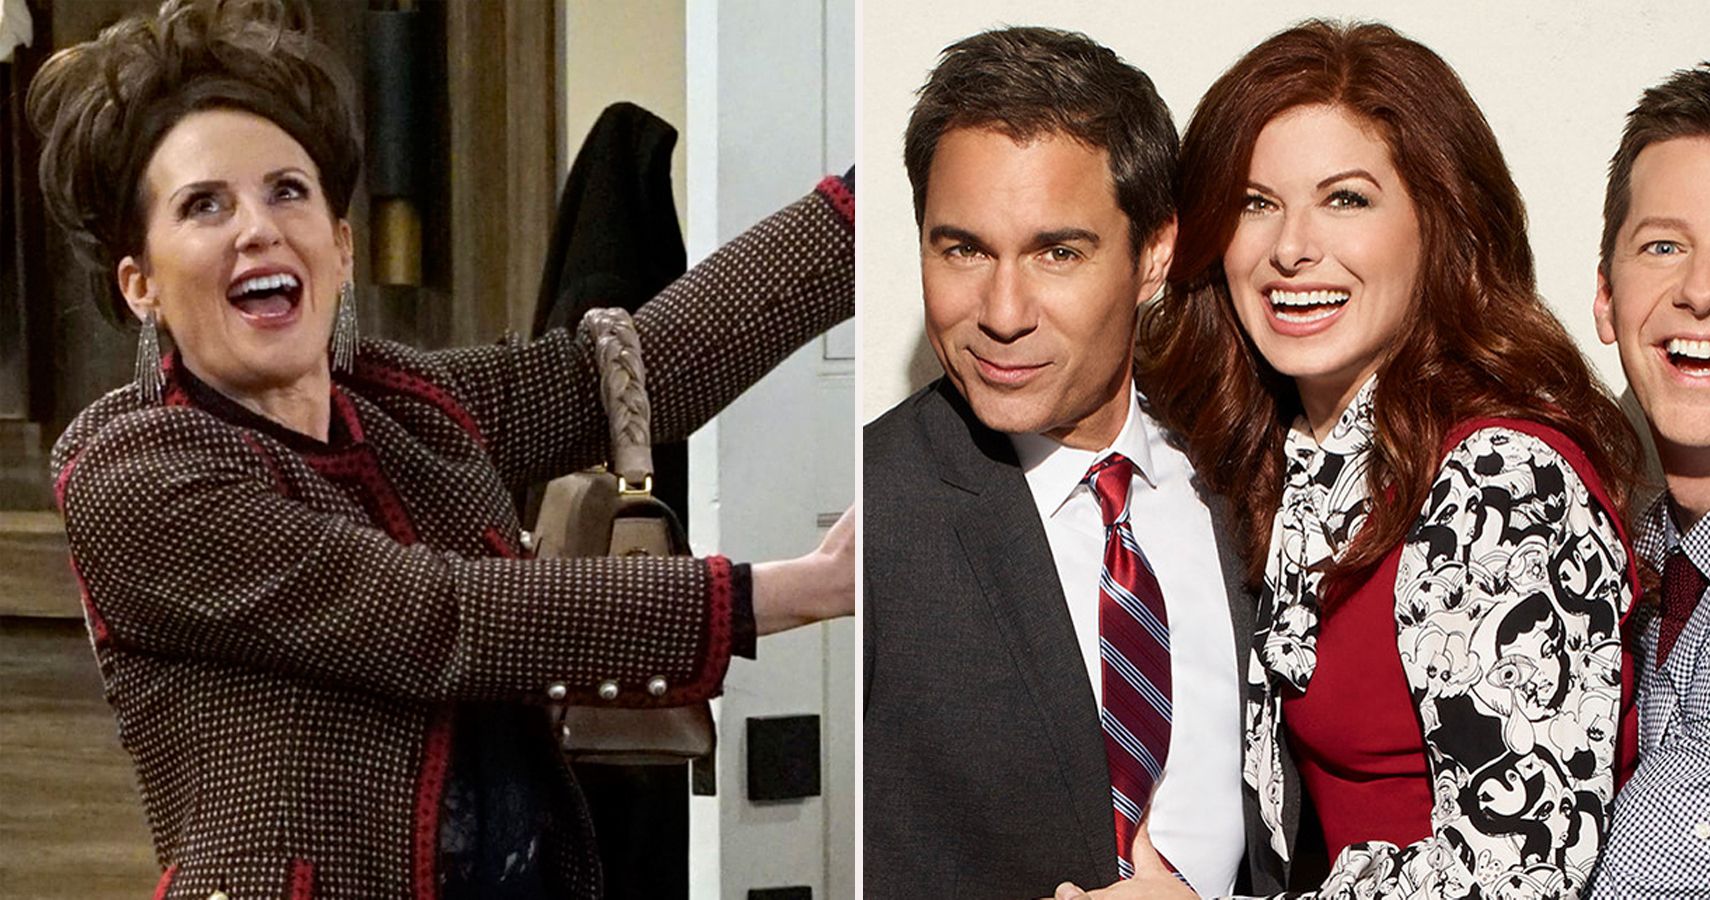 10 Jokes From Will & Grace That Have Aged Poorly